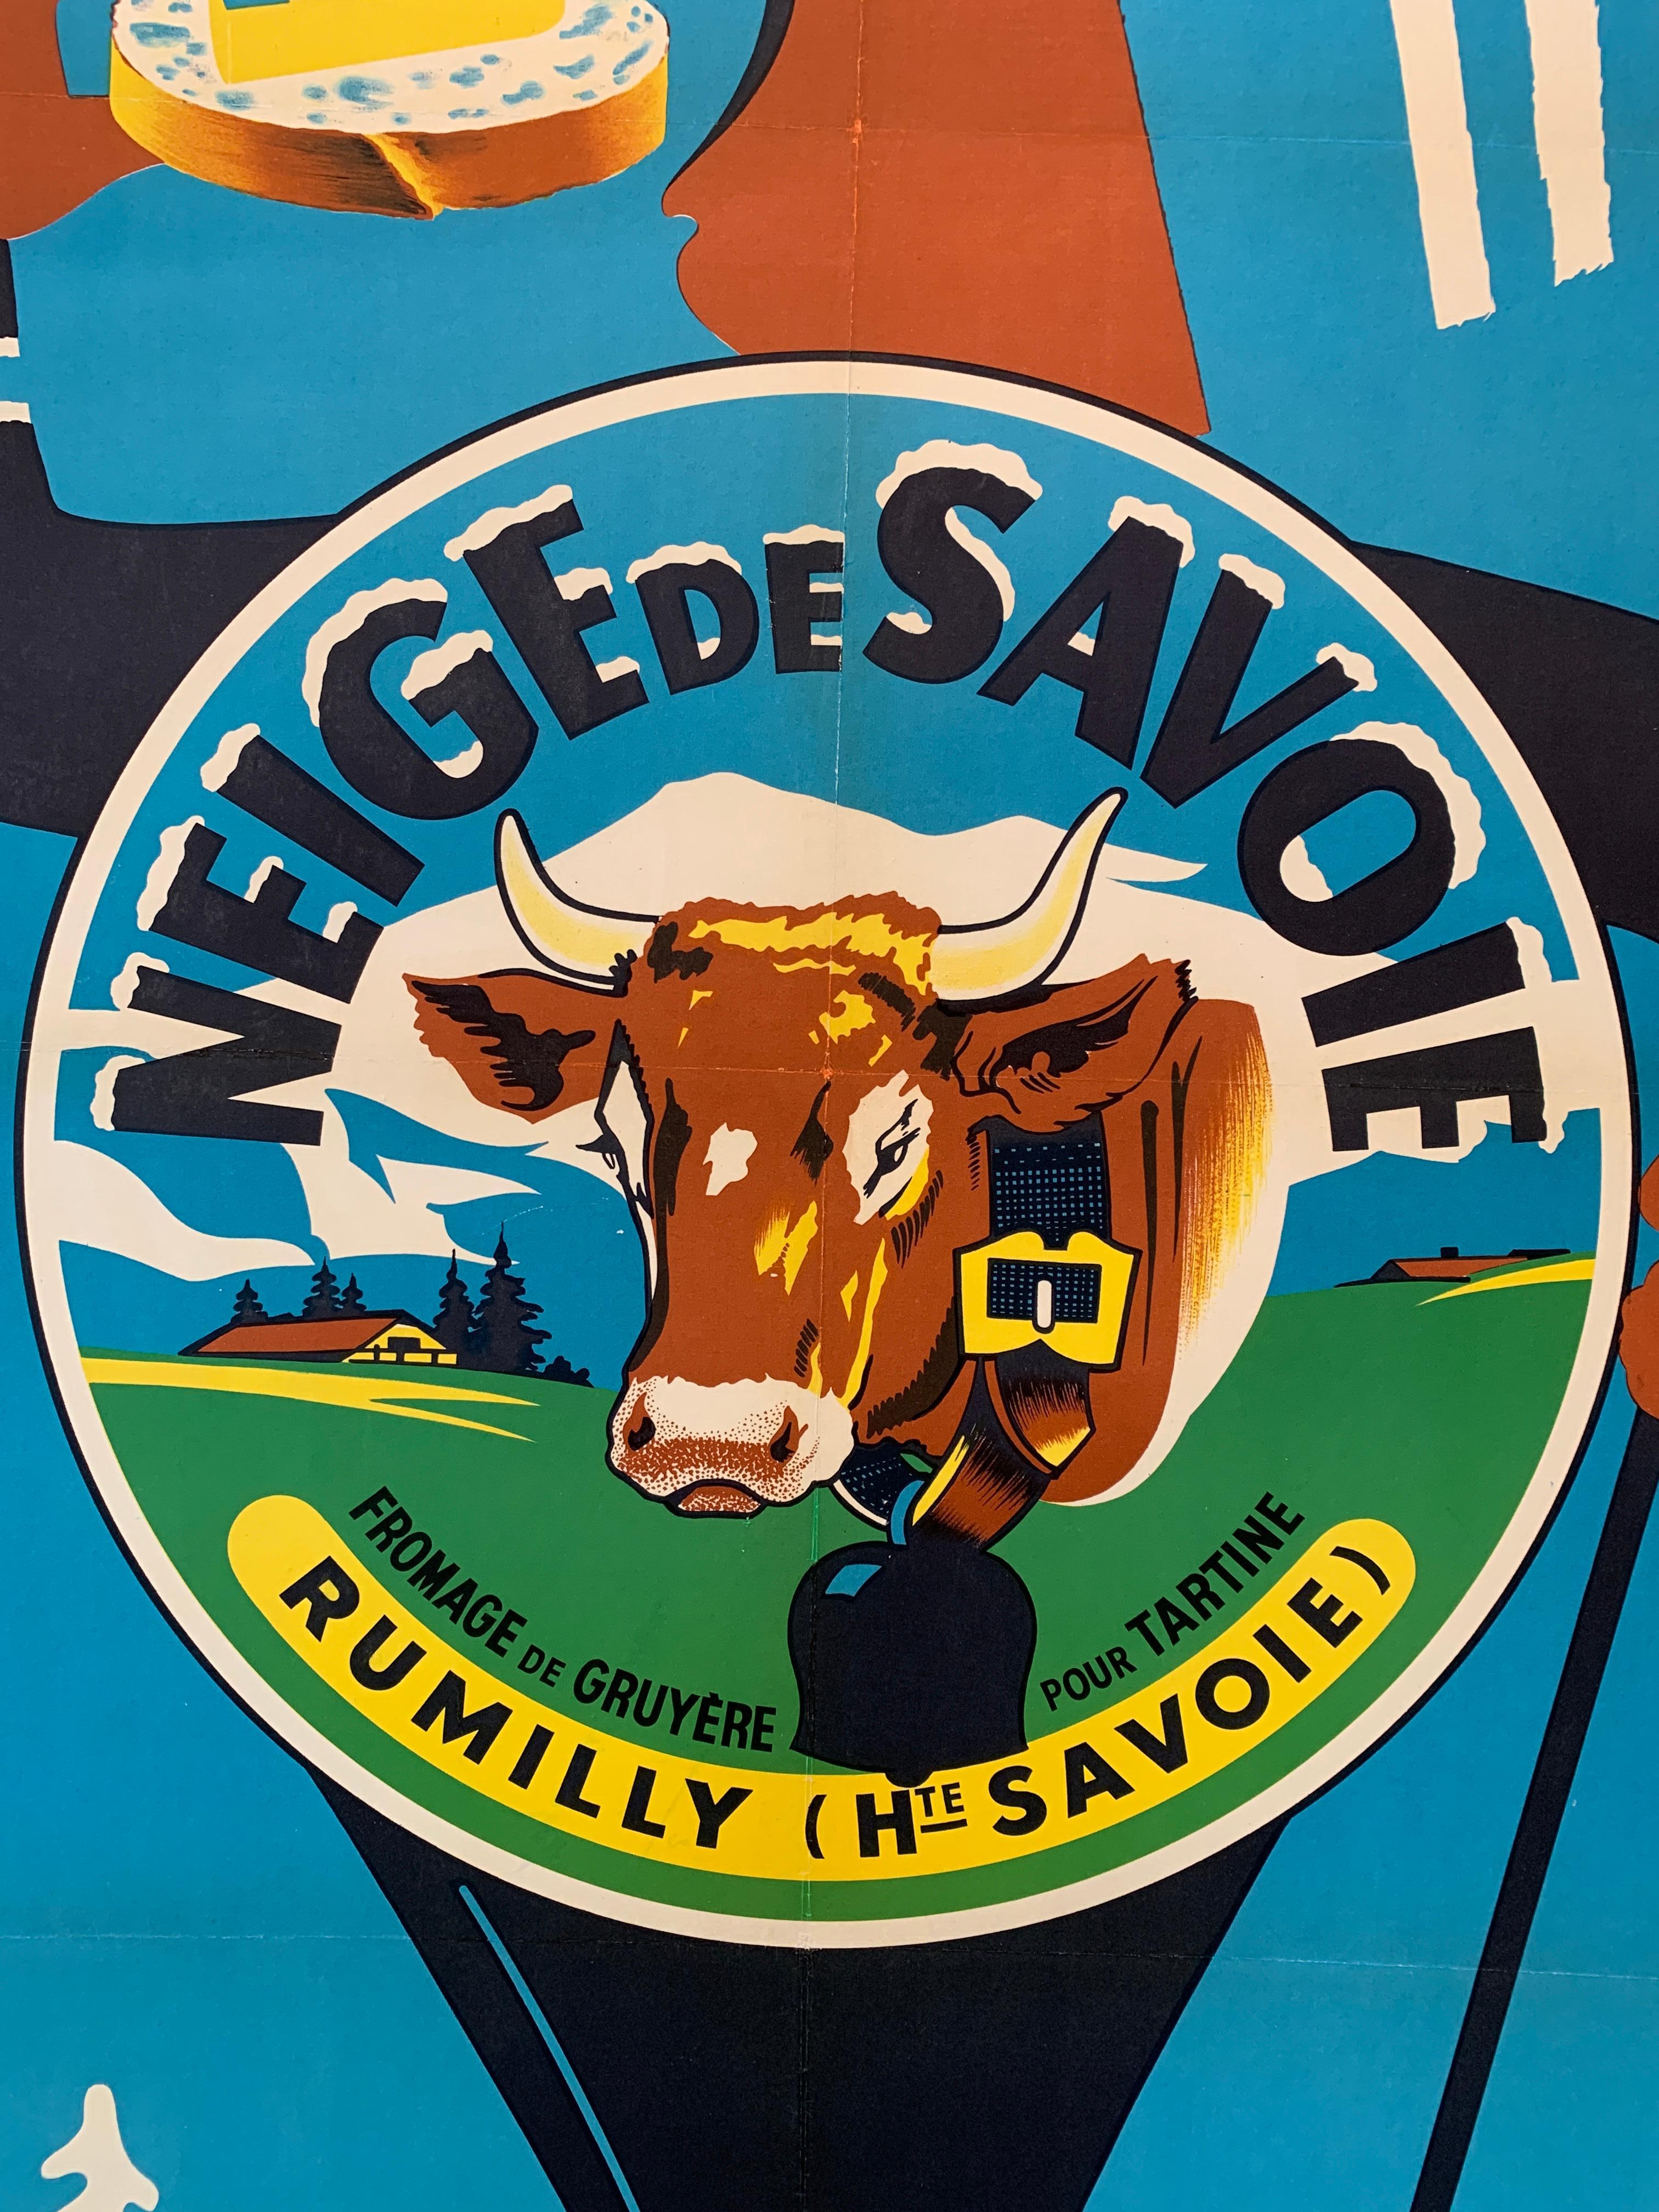 NEIGE DE SAVOIE Original Vintage Exhibition Poster, Circa 1960

A charming 1960's poster advertising the cheese which is produced in the French alps, it is a mild, semi-firm cow's milk cheese. This poster has been linen backed for preservation, the